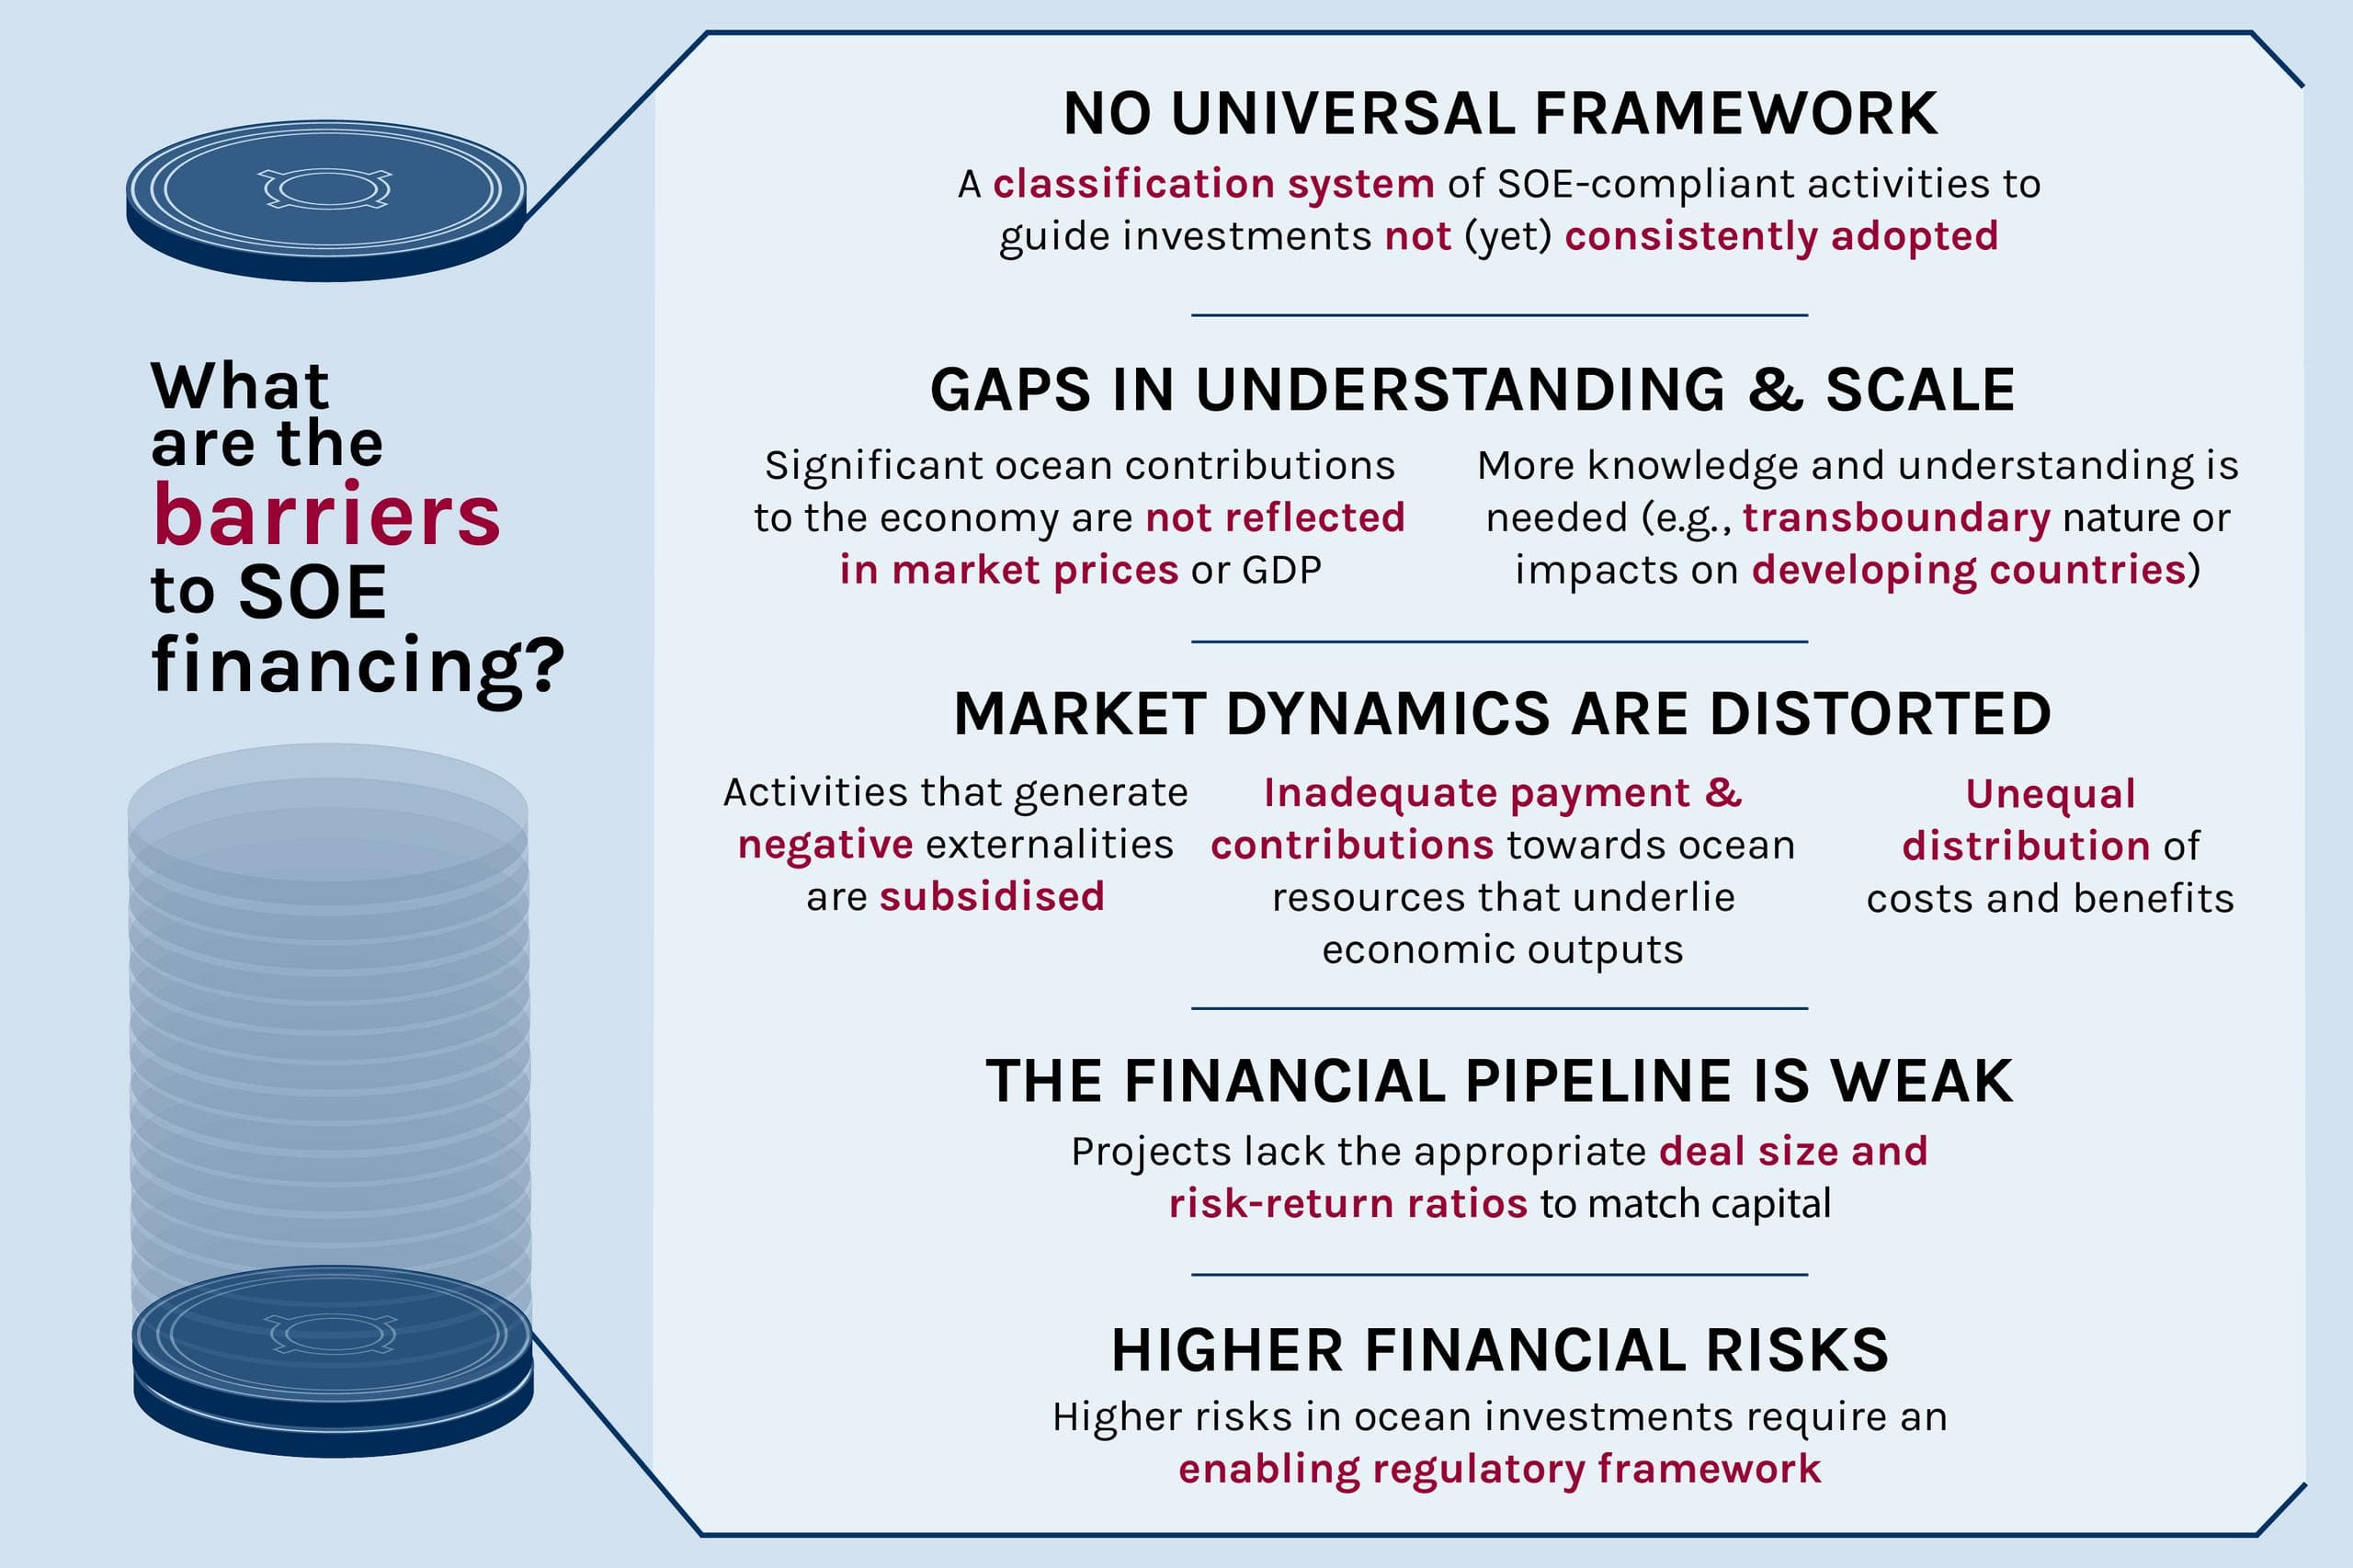 Figure: Barriers to SOE financing include a lack of universal framework, gaps in understanding and scale, distortion of market dynamics, a weak financial pipeline, and high financial risks.